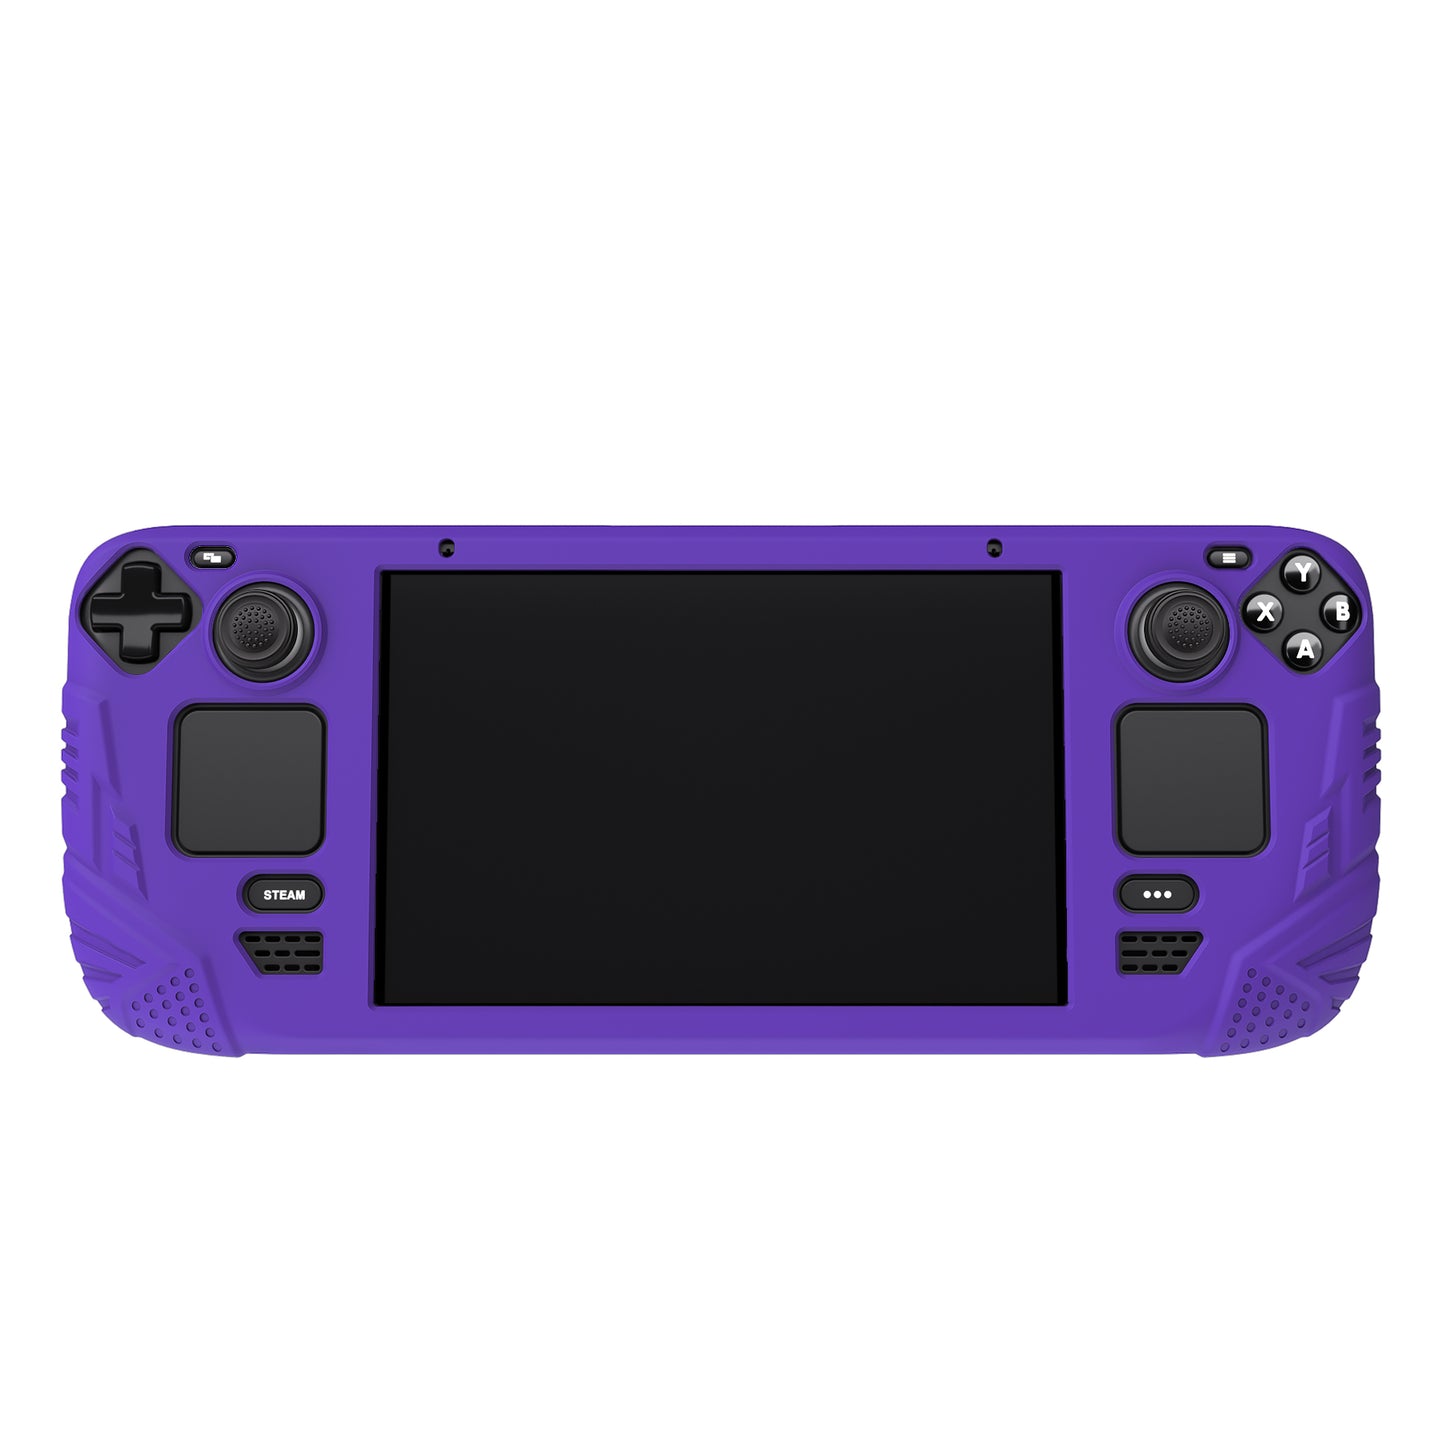 PlayVital Armor Series Protective Case for Steam Deck LCD, Soft Cover Silicone Protector for Steam Deck with Back Button Enhancement Designed & Thumb Grips Caps - Purple - XFSDP005 PlayVital